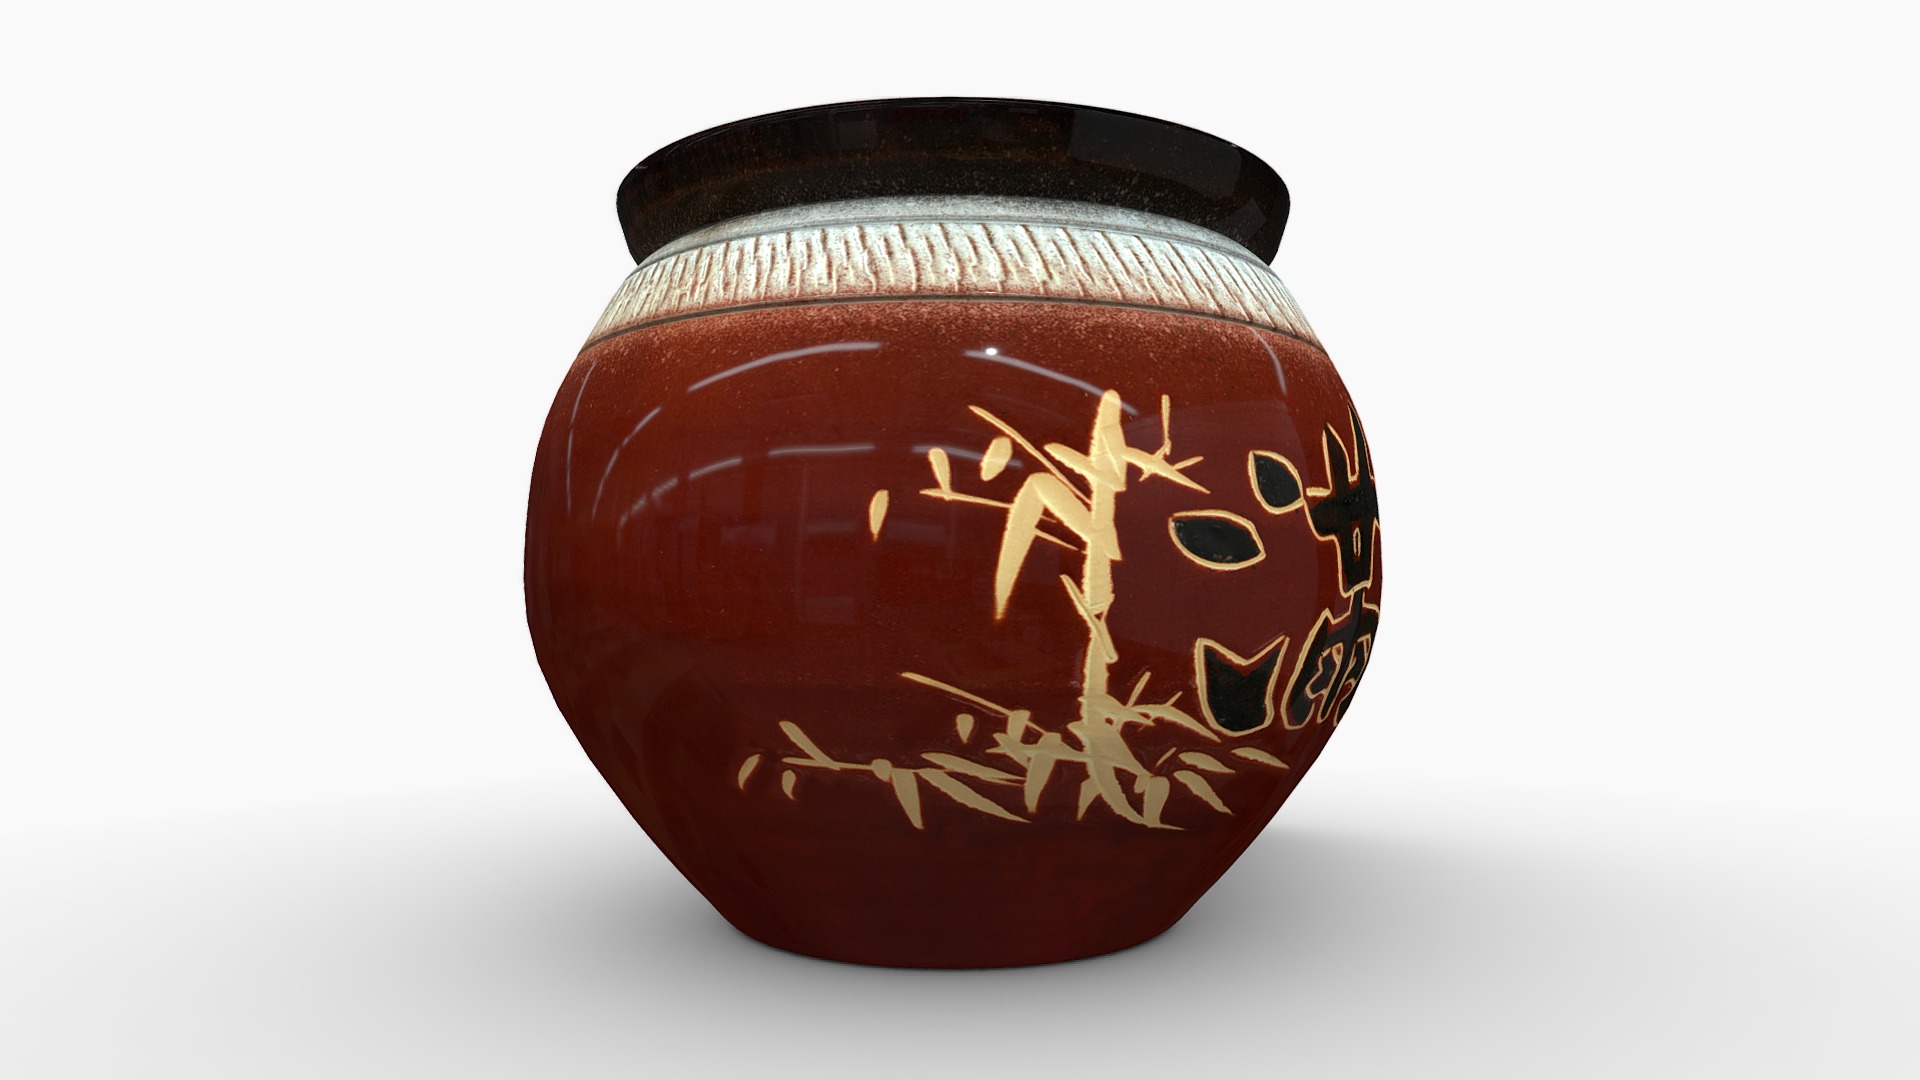 3D model 【3D模擬-上等】10斤棗紅『 滿足 』米甕展示 - This is a 3D model of the 【3D模擬-上等】10斤棗紅『 滿足 』米甕展示. The 3D model is about a red vase with a black lid.